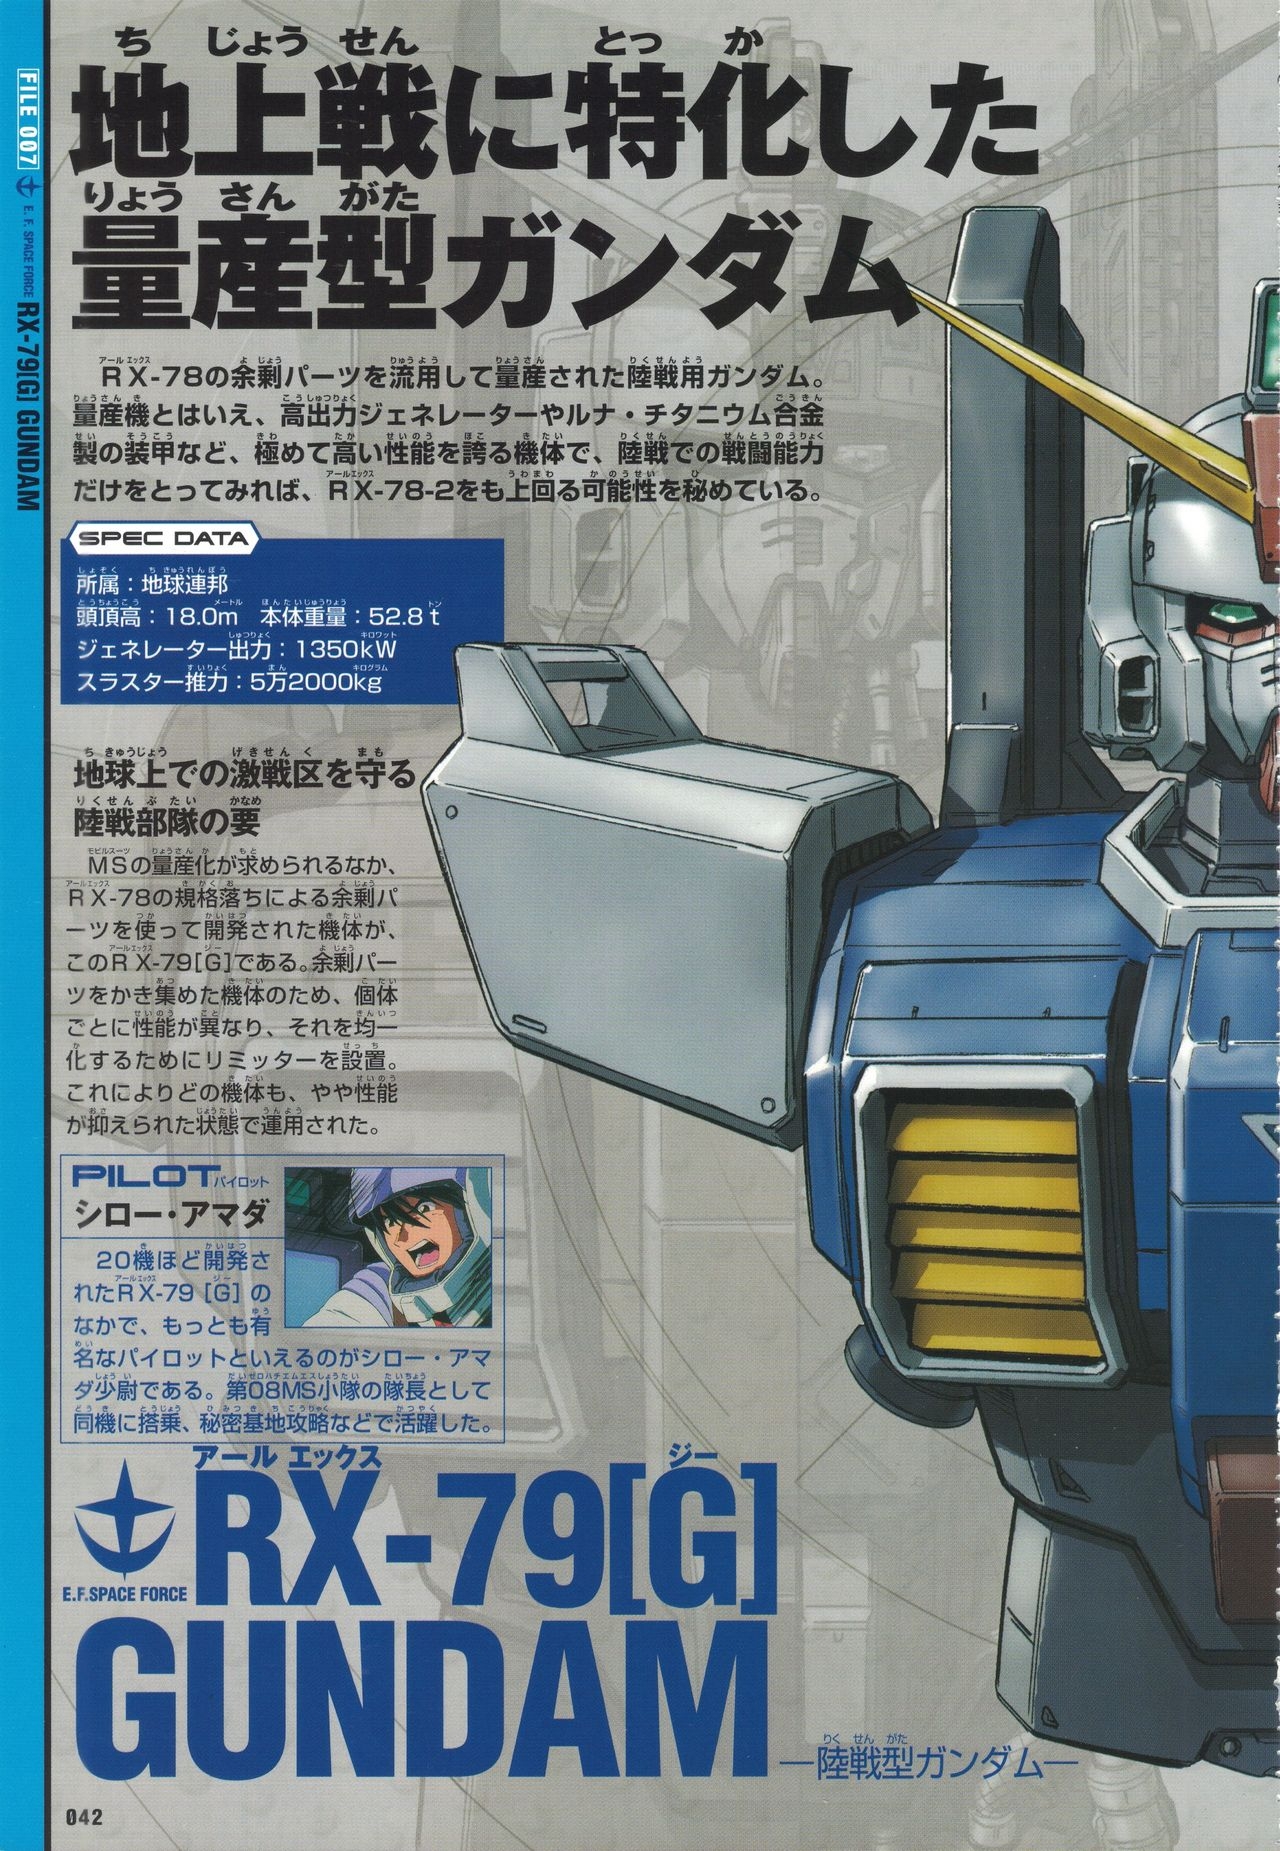 Mobile Suit Gundam - New Cross-Section Book - One Year War Edition 46